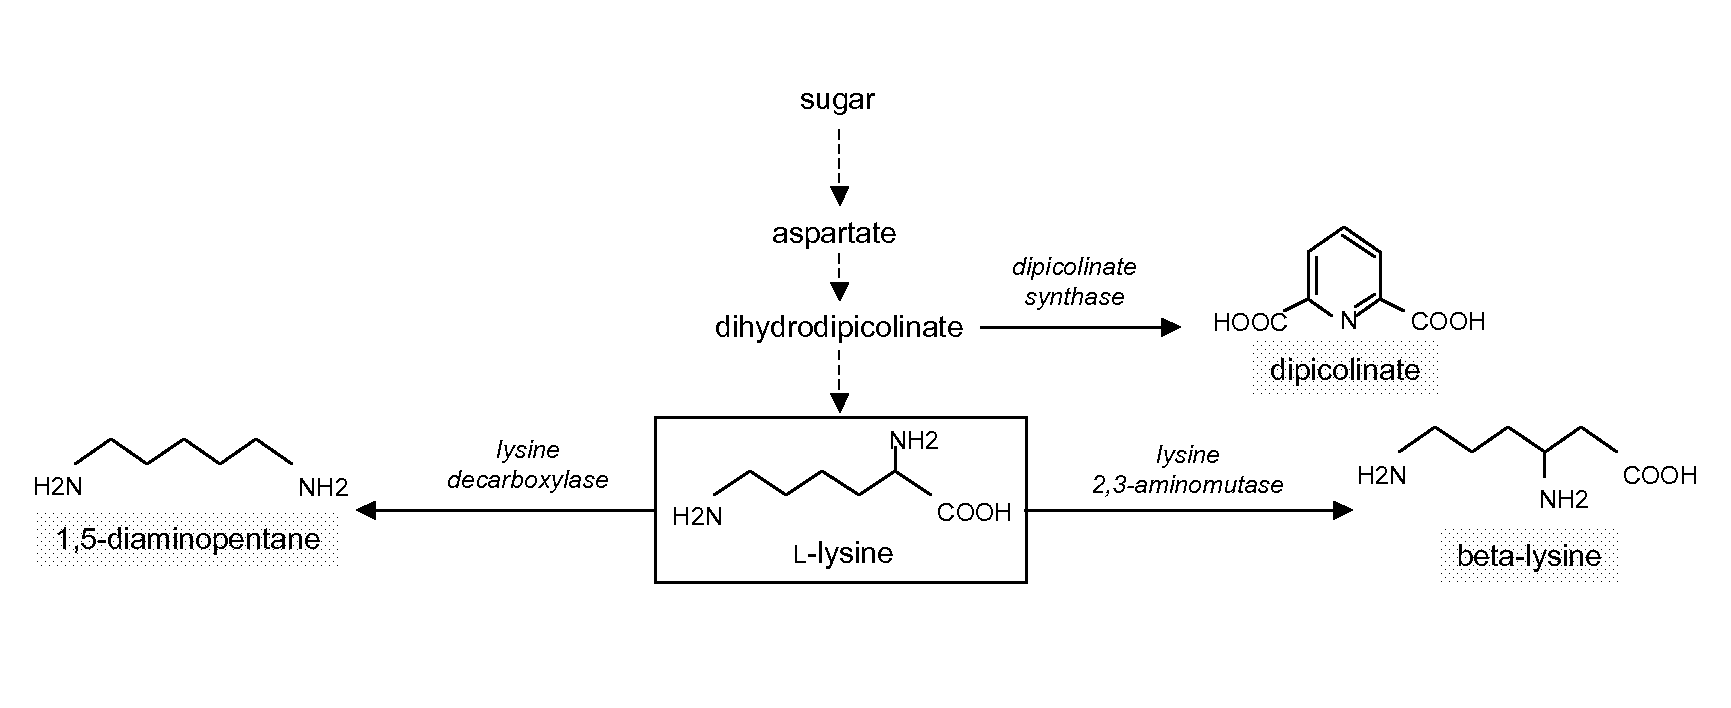 Production Process for Fine Chemicals Using Microorganisms with Reduced Isocitrate Dehydrogenase Activity